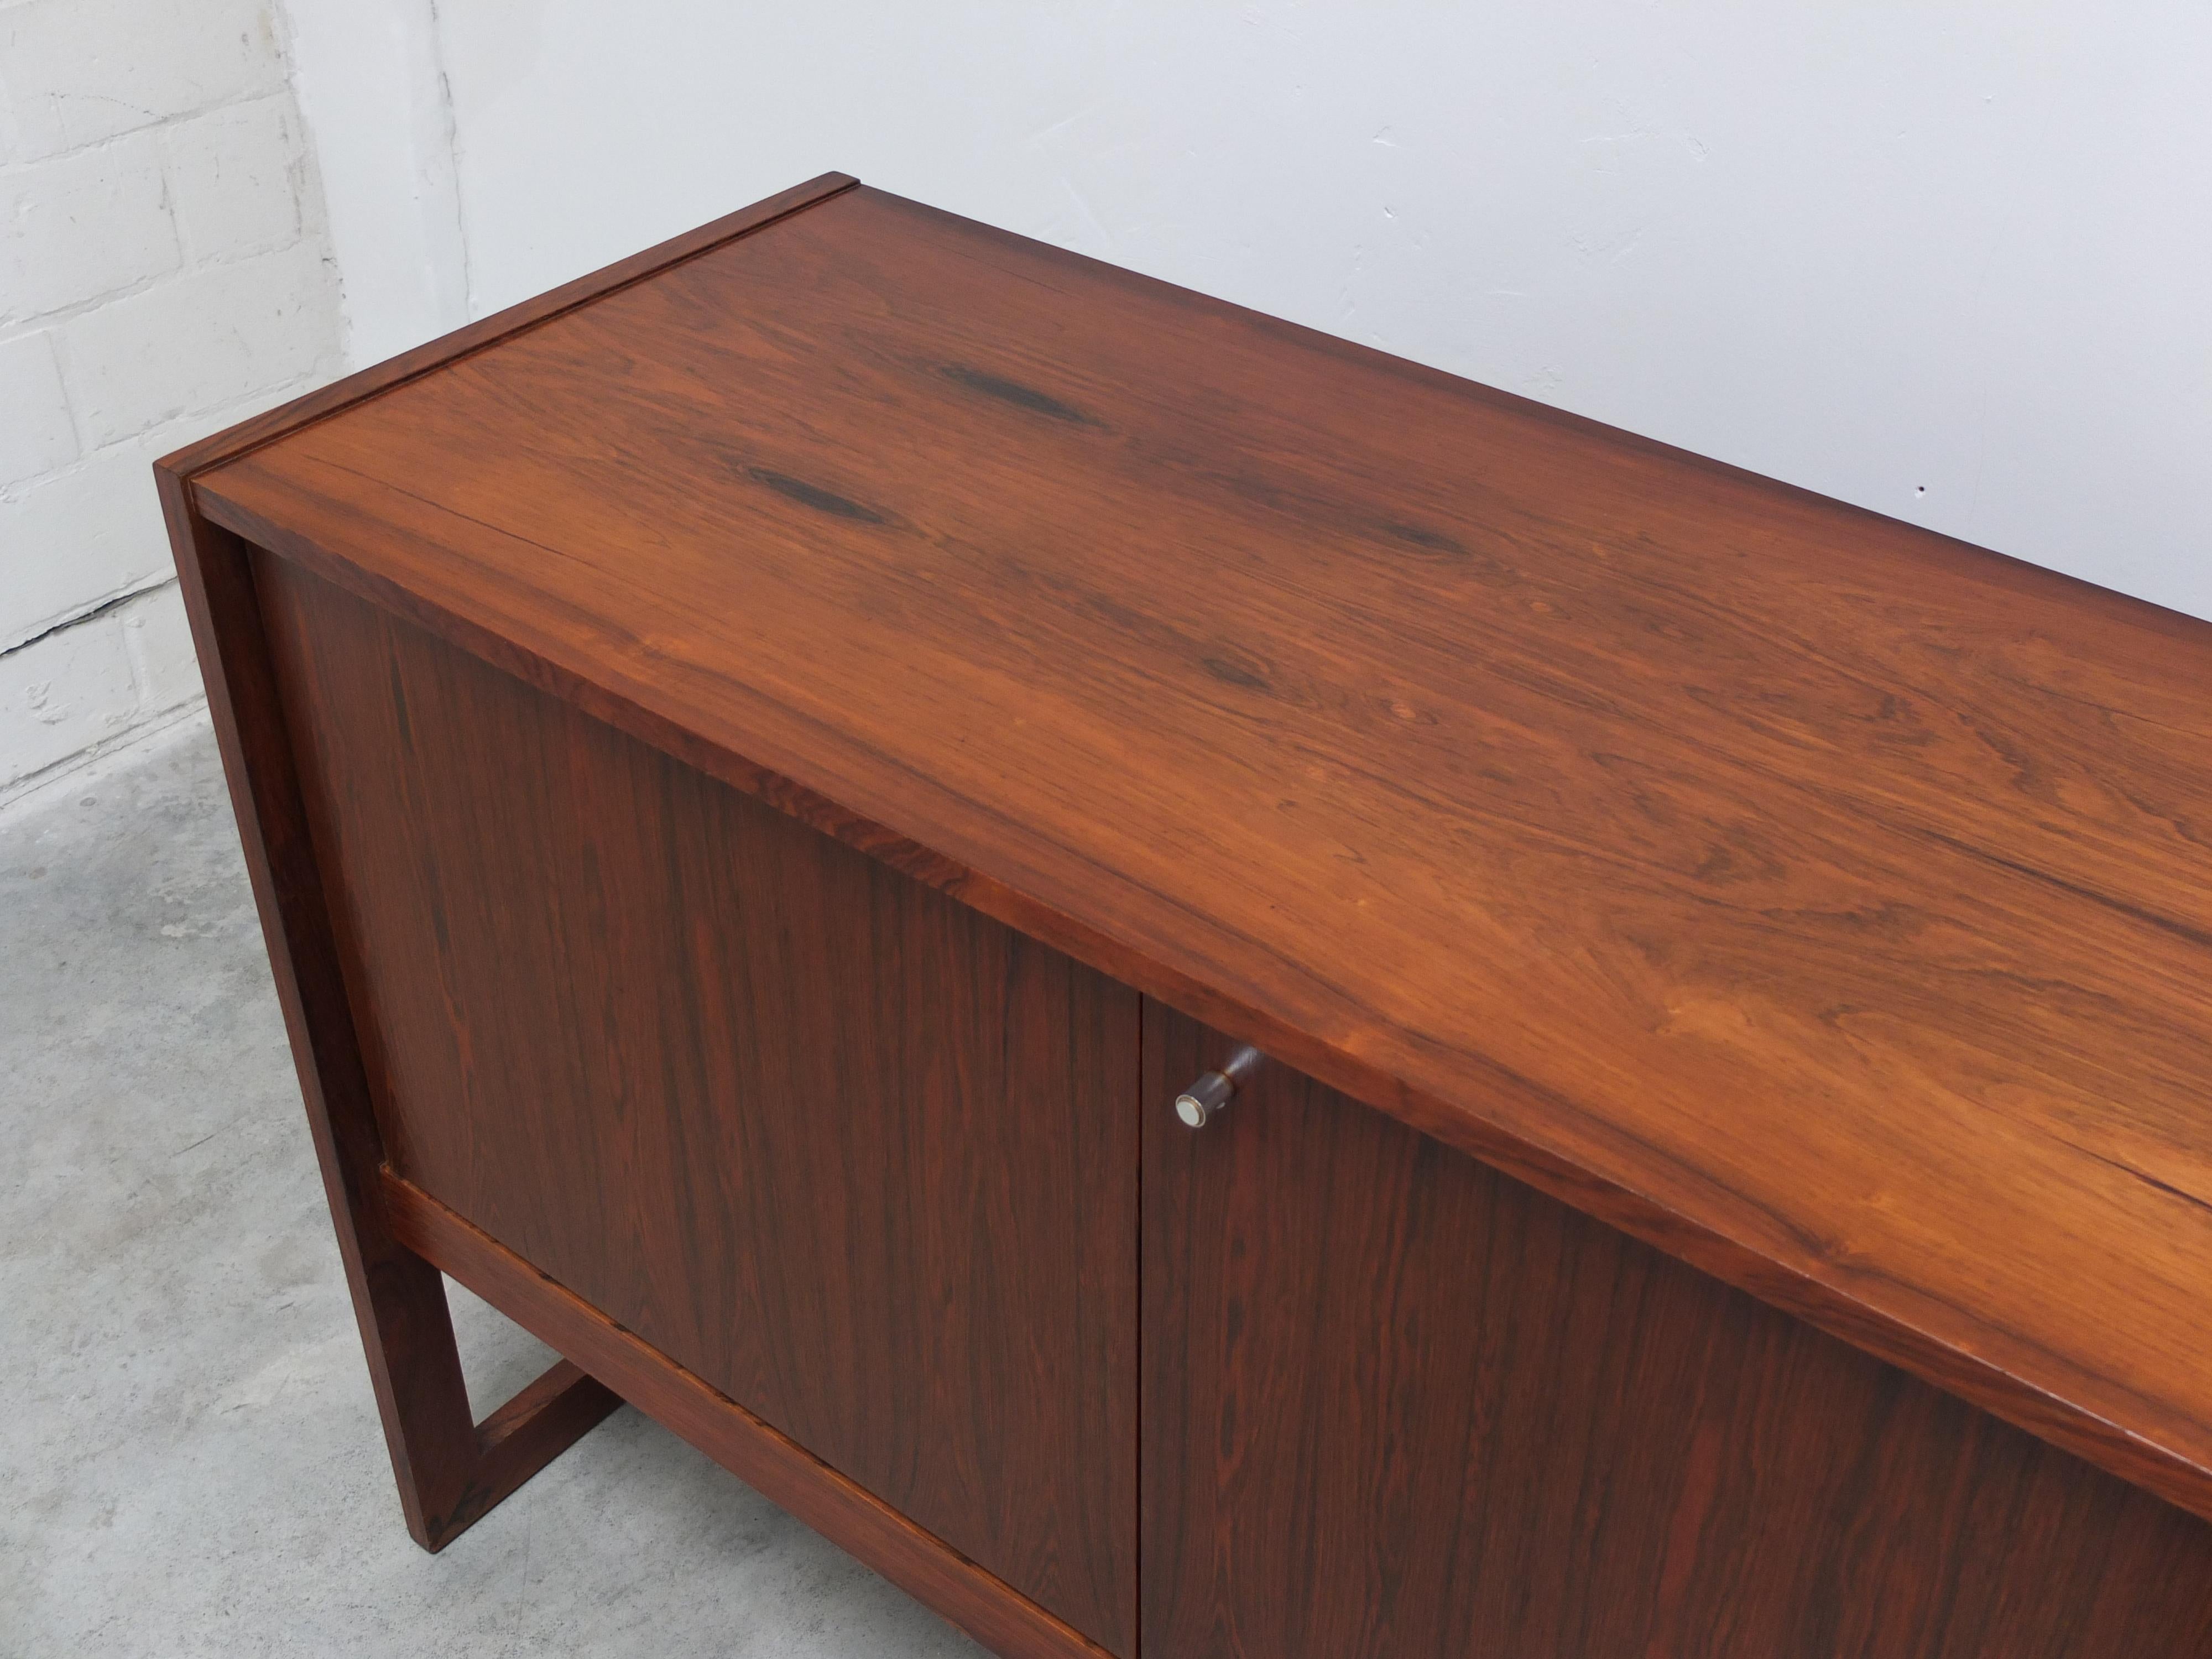 Large Exclusive 'Tecton' Sideboard by V-Form, 1960s For Sale 4